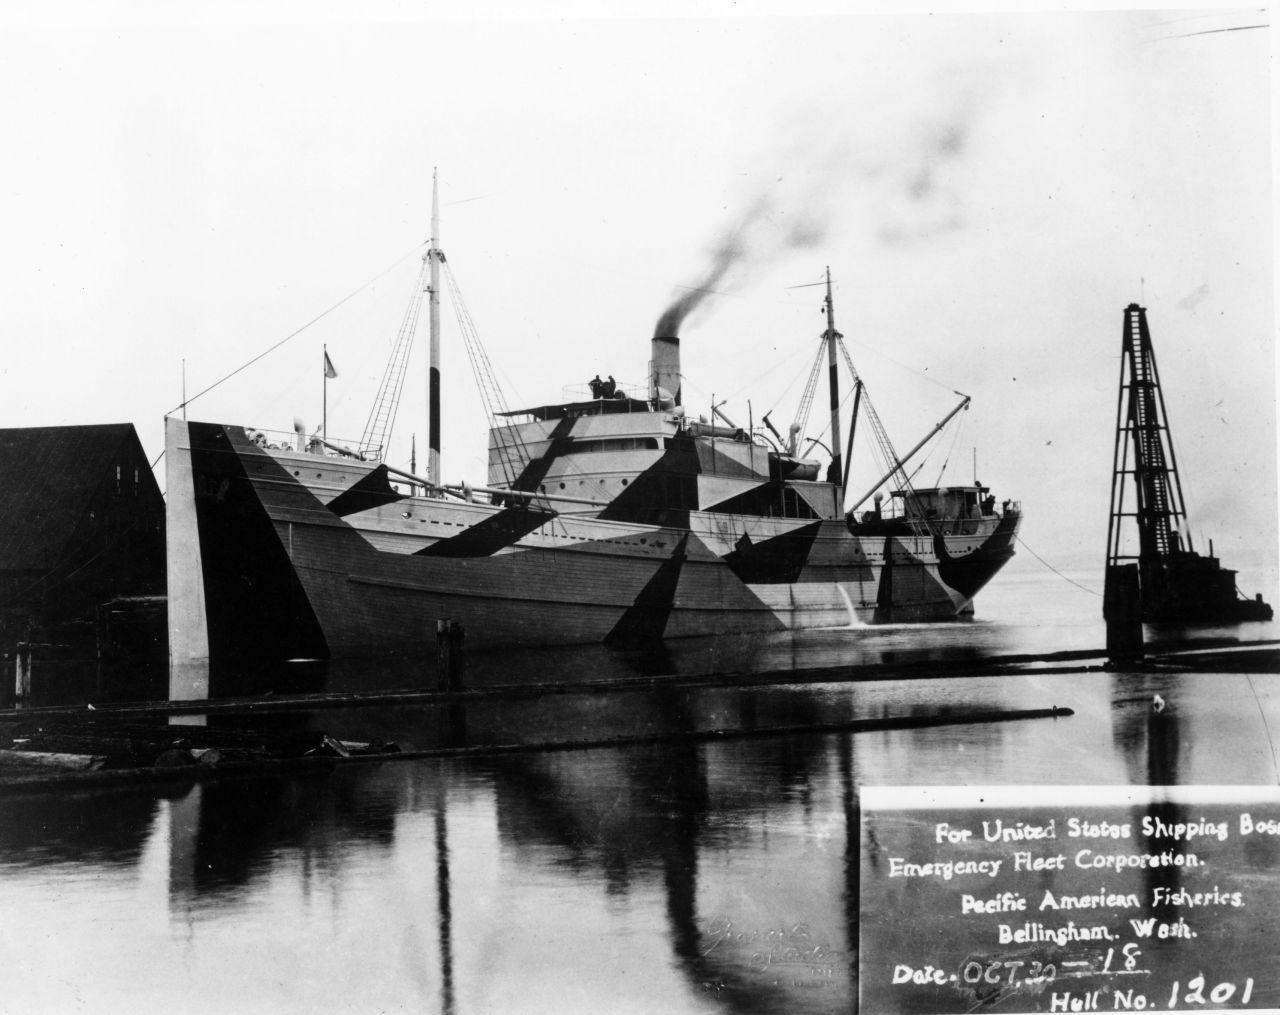 A wooden ship built for the U.S. Shipping Board Emergency Fleet Corporation in Bellingham, Washington. The majority of wooden boats constructed never saw war service. Most were sold for salvage and then burned and sunk. This particular boat was painted with <a href="http://www.shipcamouflage.com/1_4.htm" target="_blank" target="_blank">"dazzle" camouflage. </a>